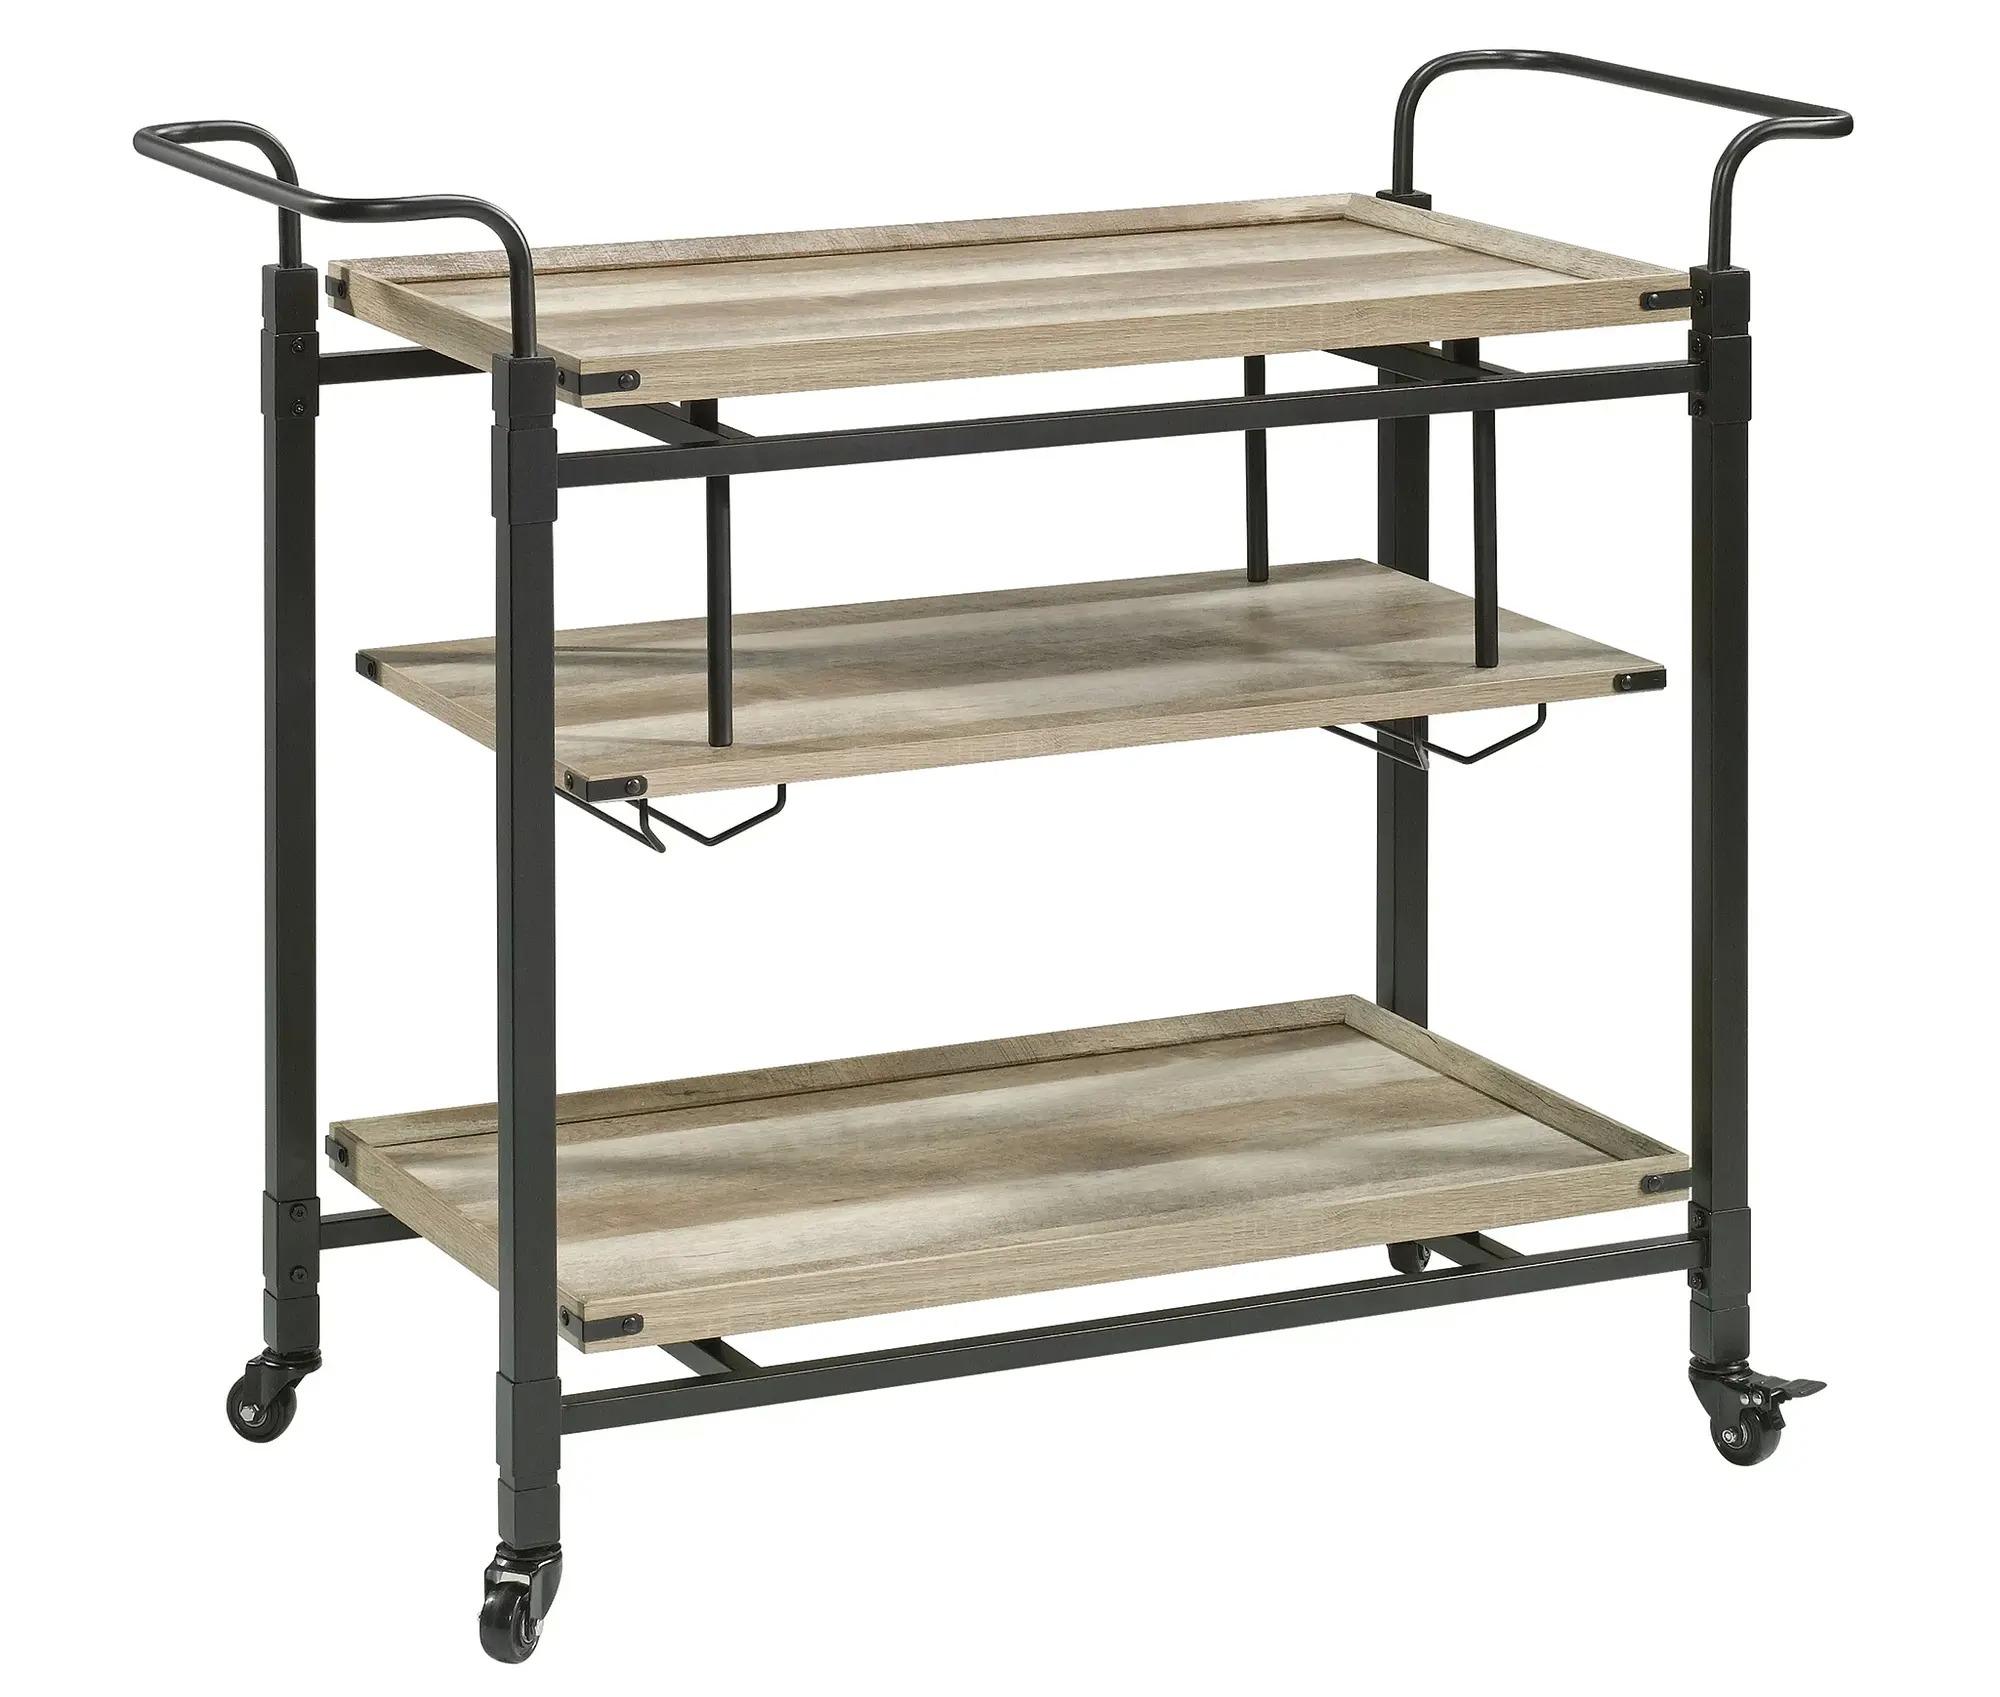 Better Homes and Gardens Crossmill Metal Bar Chart for $60 Shipped